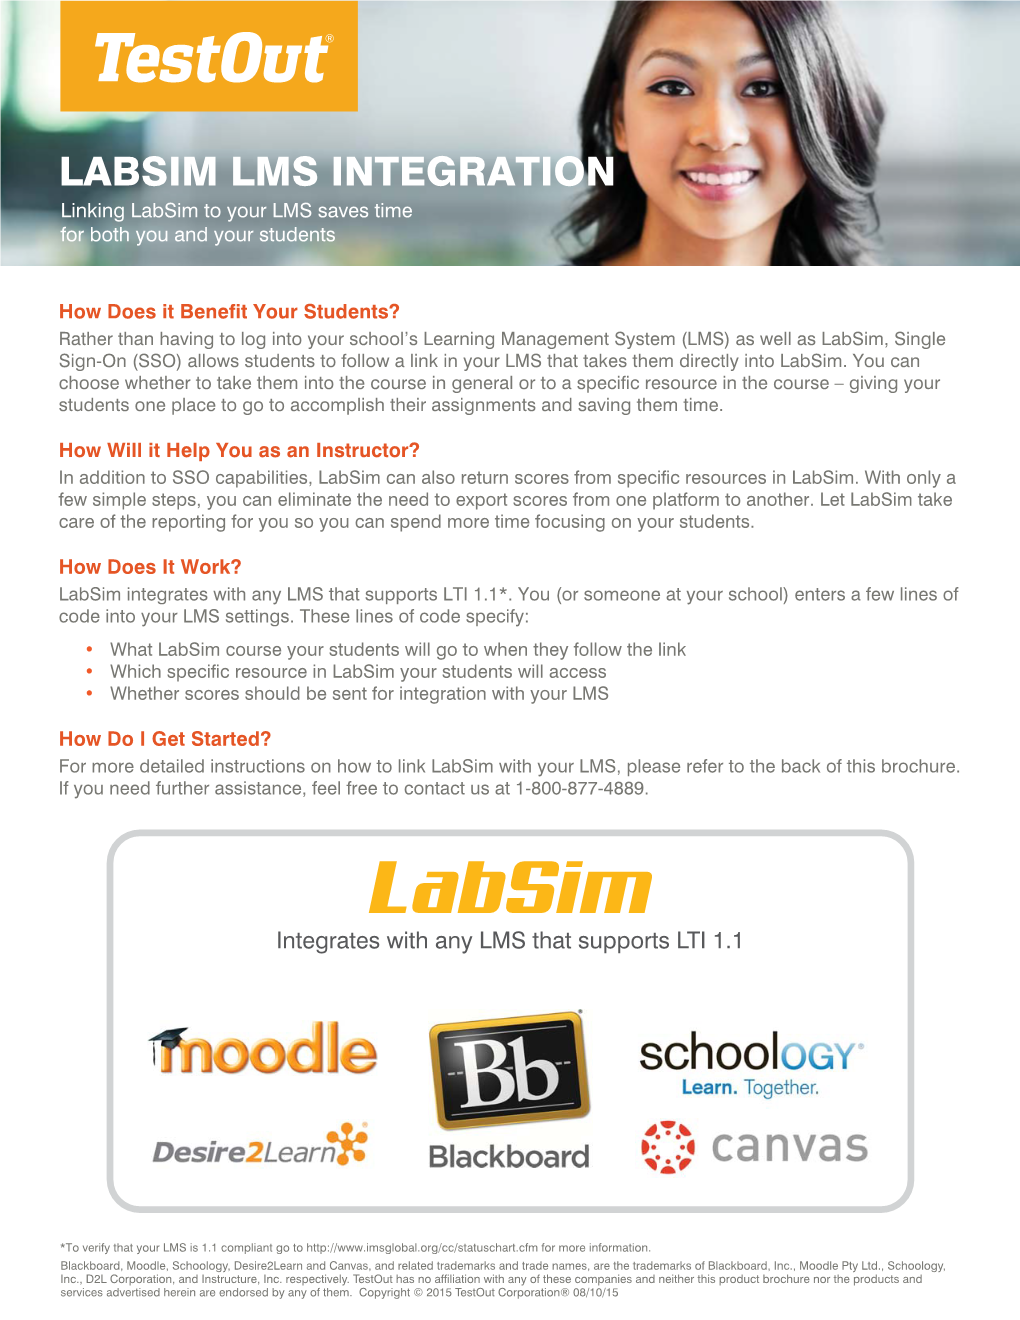 LABSIM LMS INTEGRATION Linking Labsim to Your LMS Saves Time for Both You and Your Students